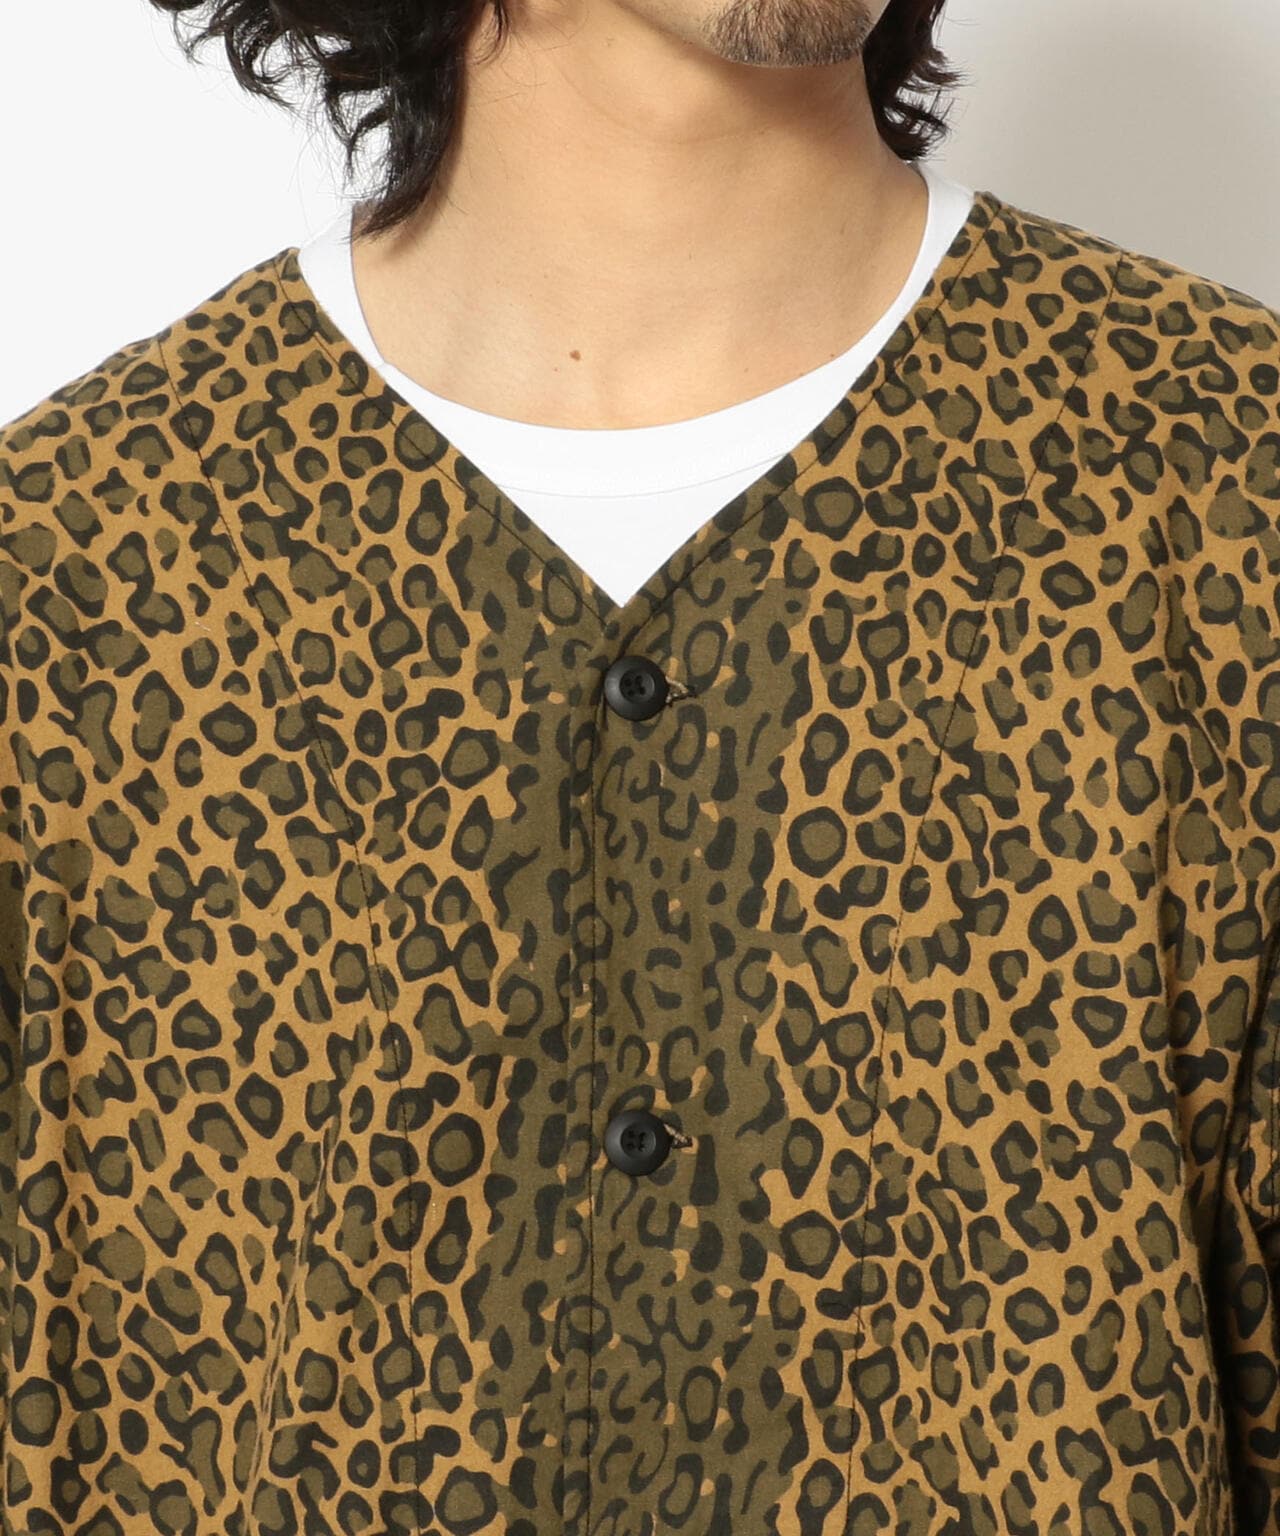 SOUTH2 WEST8/サウスツーウエストエイト　V NECK ARMY SHIRT - FLANNEL PT. Vネックアーミーシャツ